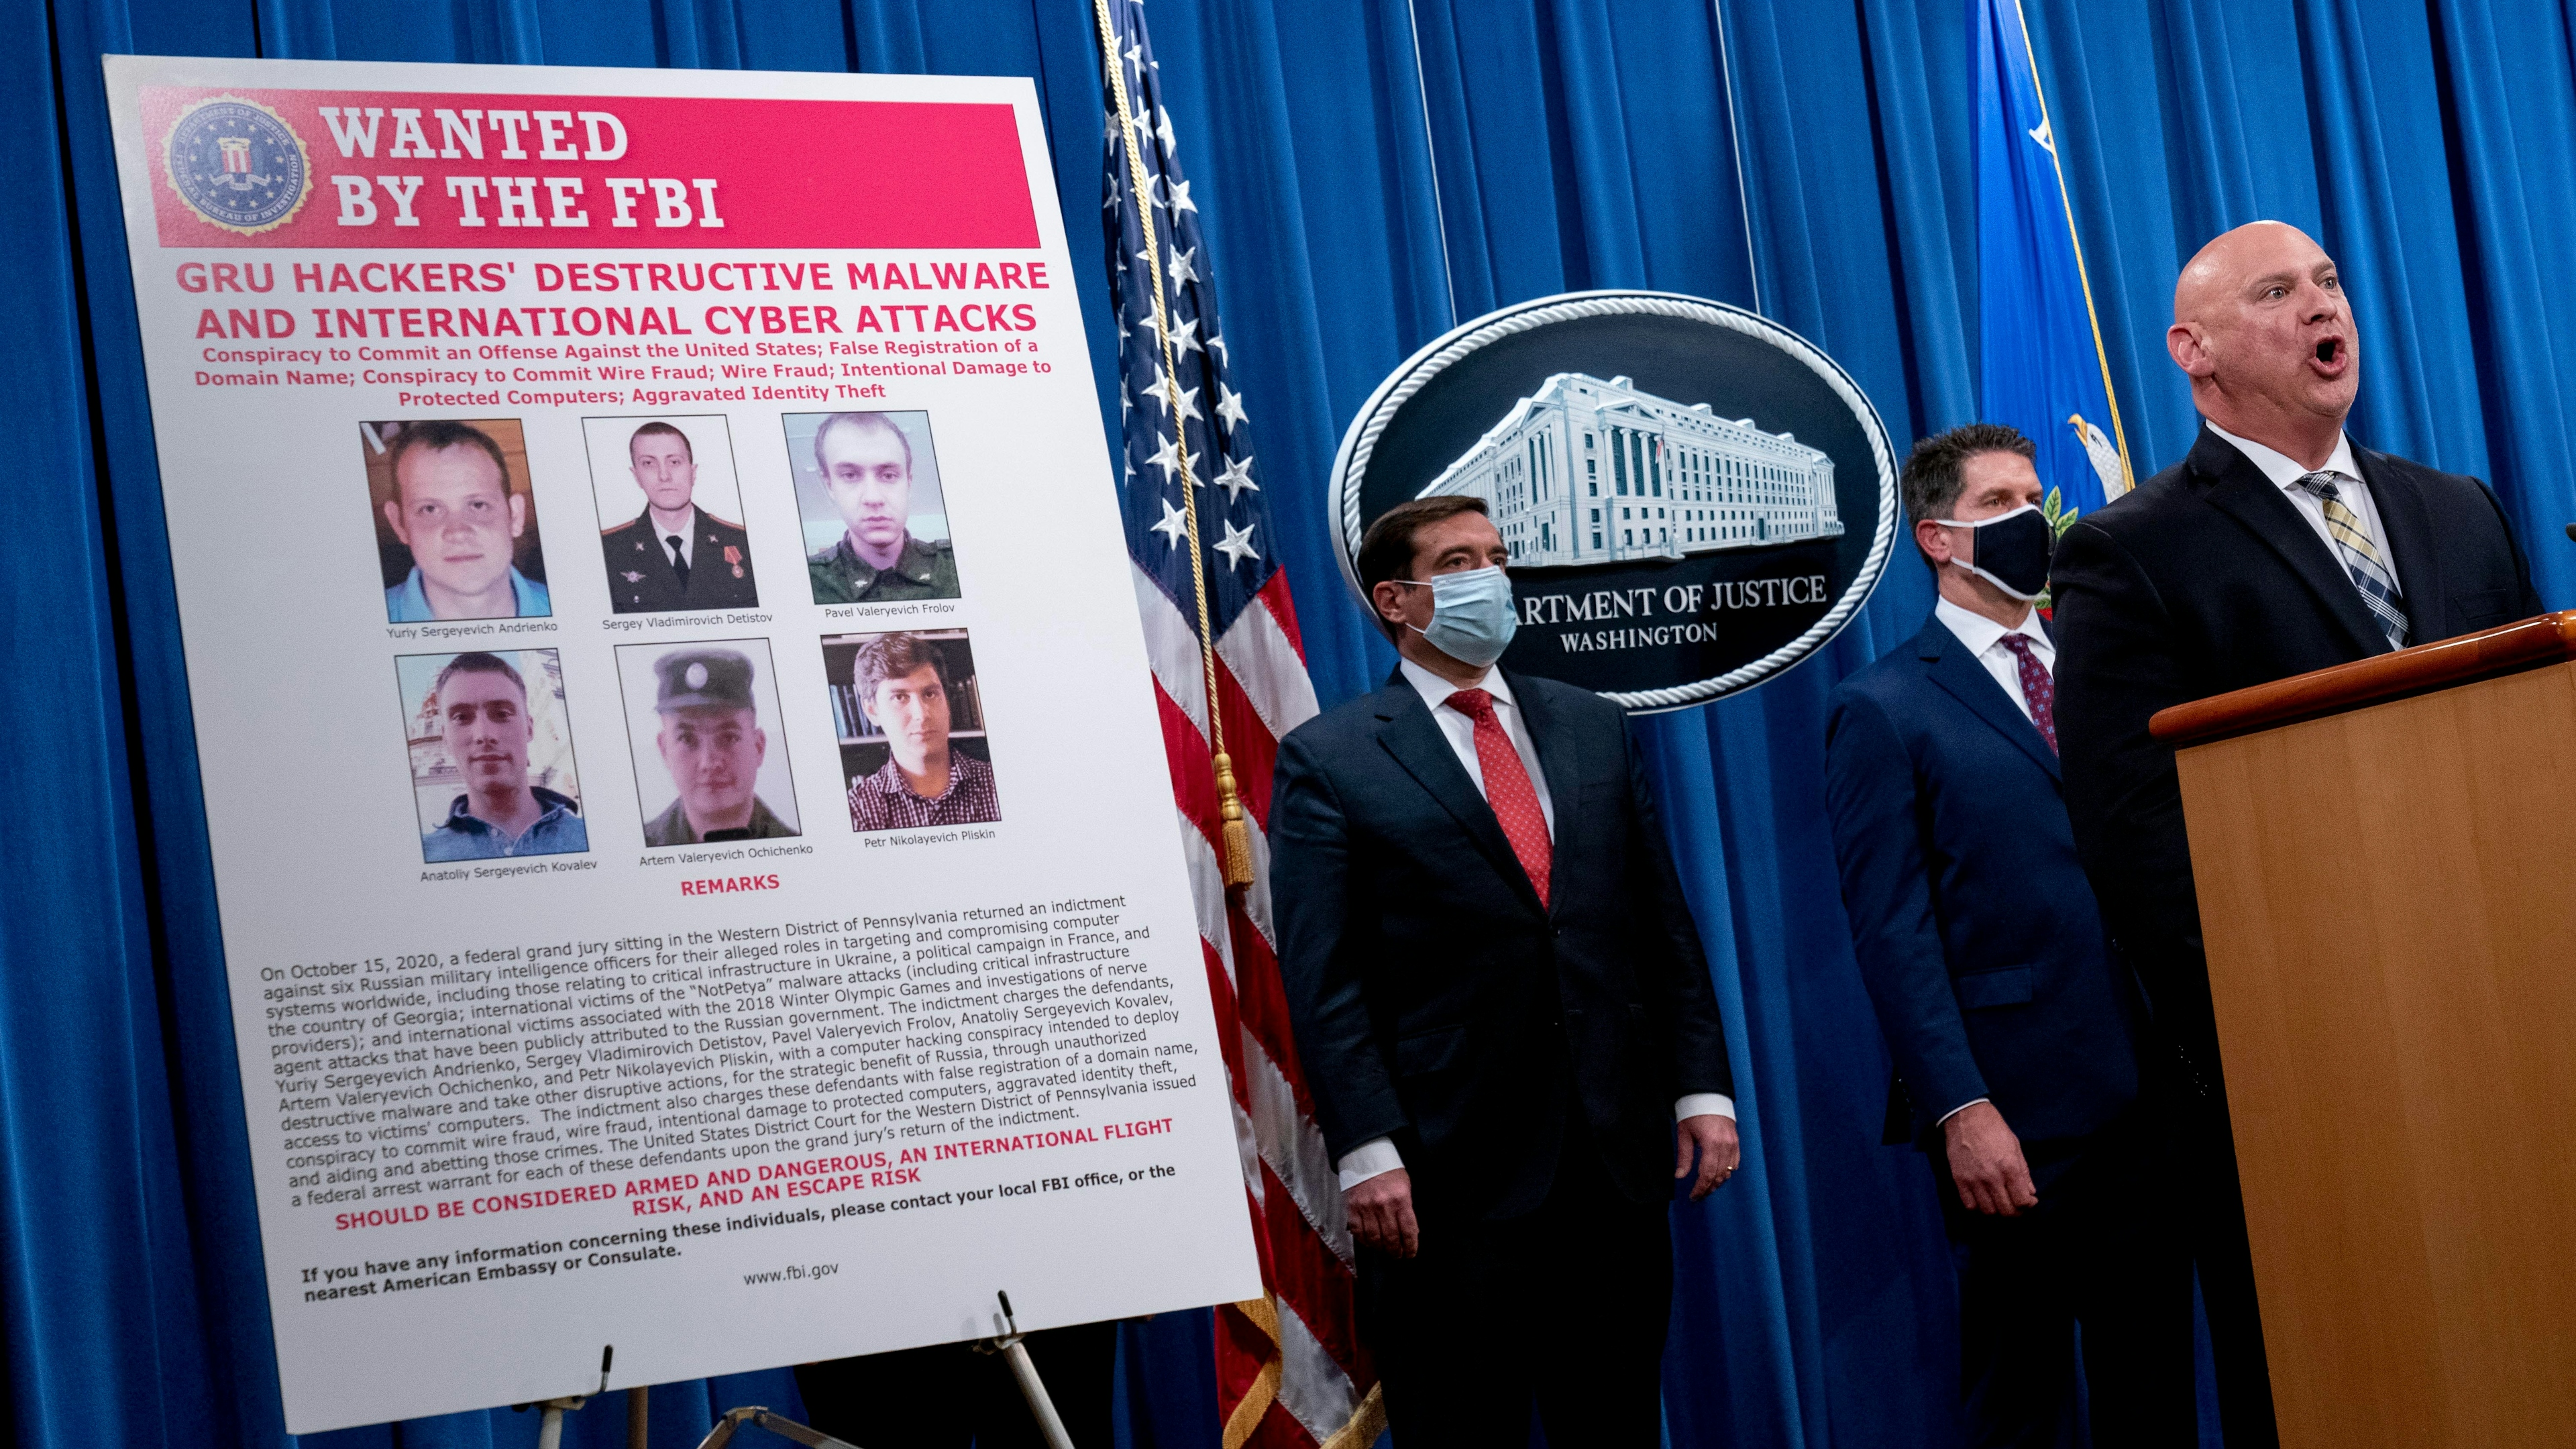 A poster showing six wanted Russian military intelligence officers is displayed